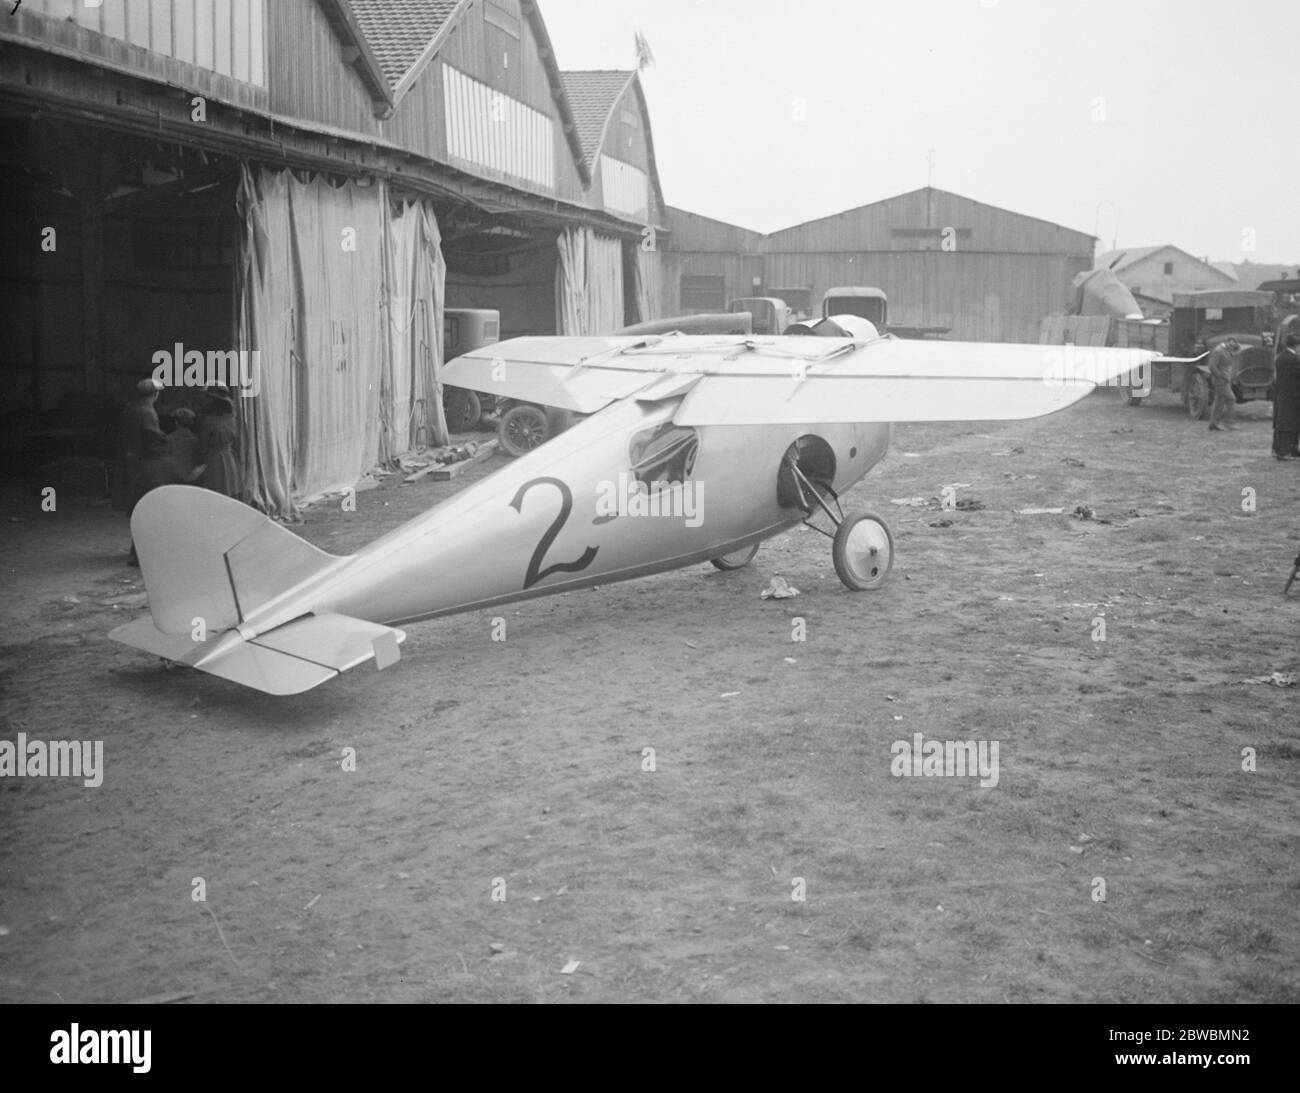 Wonderful Racing Monoplane The Dayton Wright machine . It has a 6 cylinder Mercedes engine and the small flying surface and high speed of the aeroplane make it a very difficult machine to land . The Dayton Wright machine 28 September 1920 Stock Photo